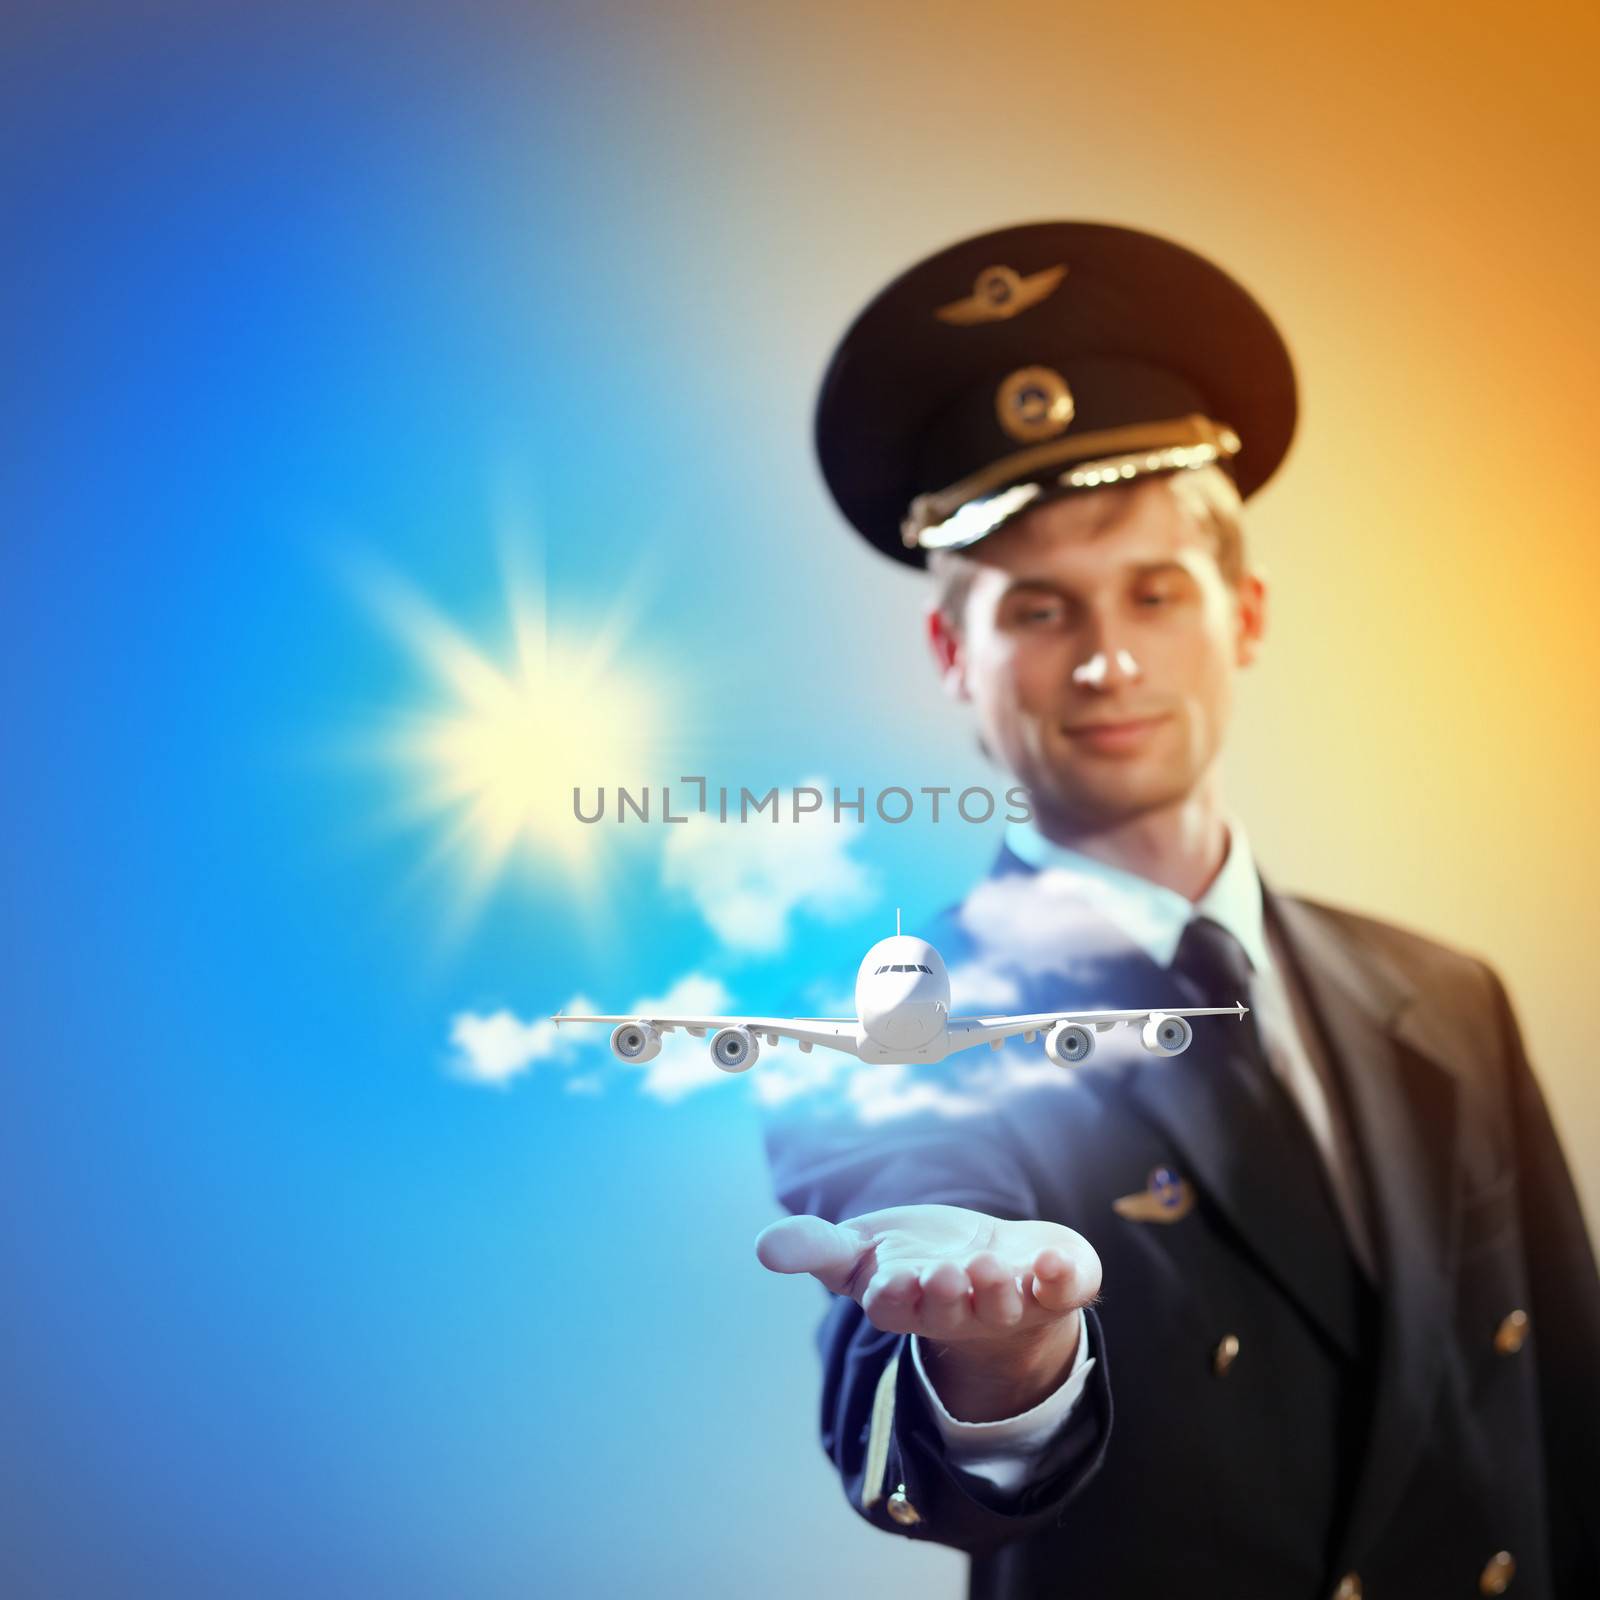 Image of pilot with airplane taking off from his hand